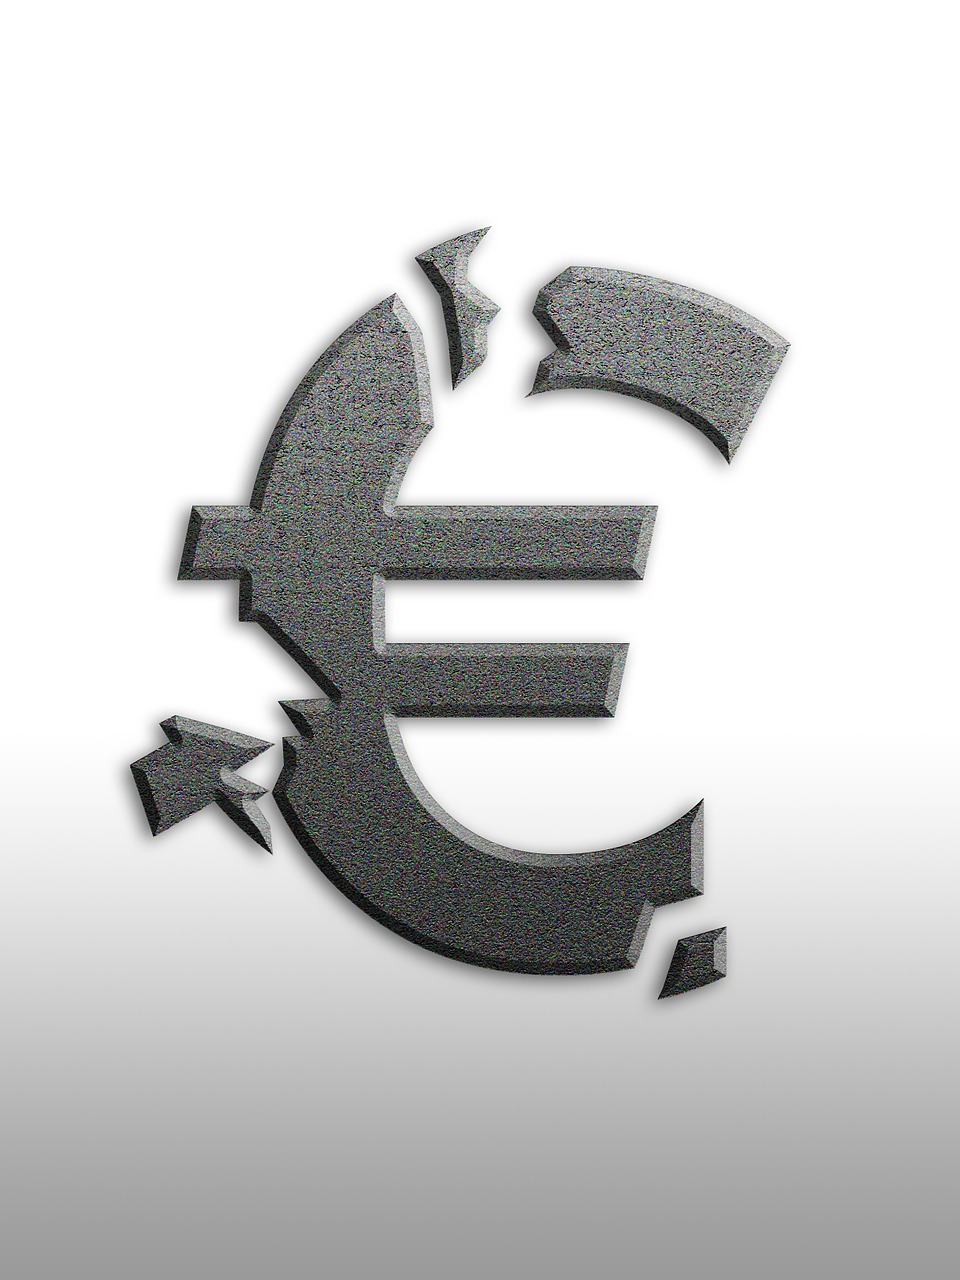 euro euro sign currency free photo